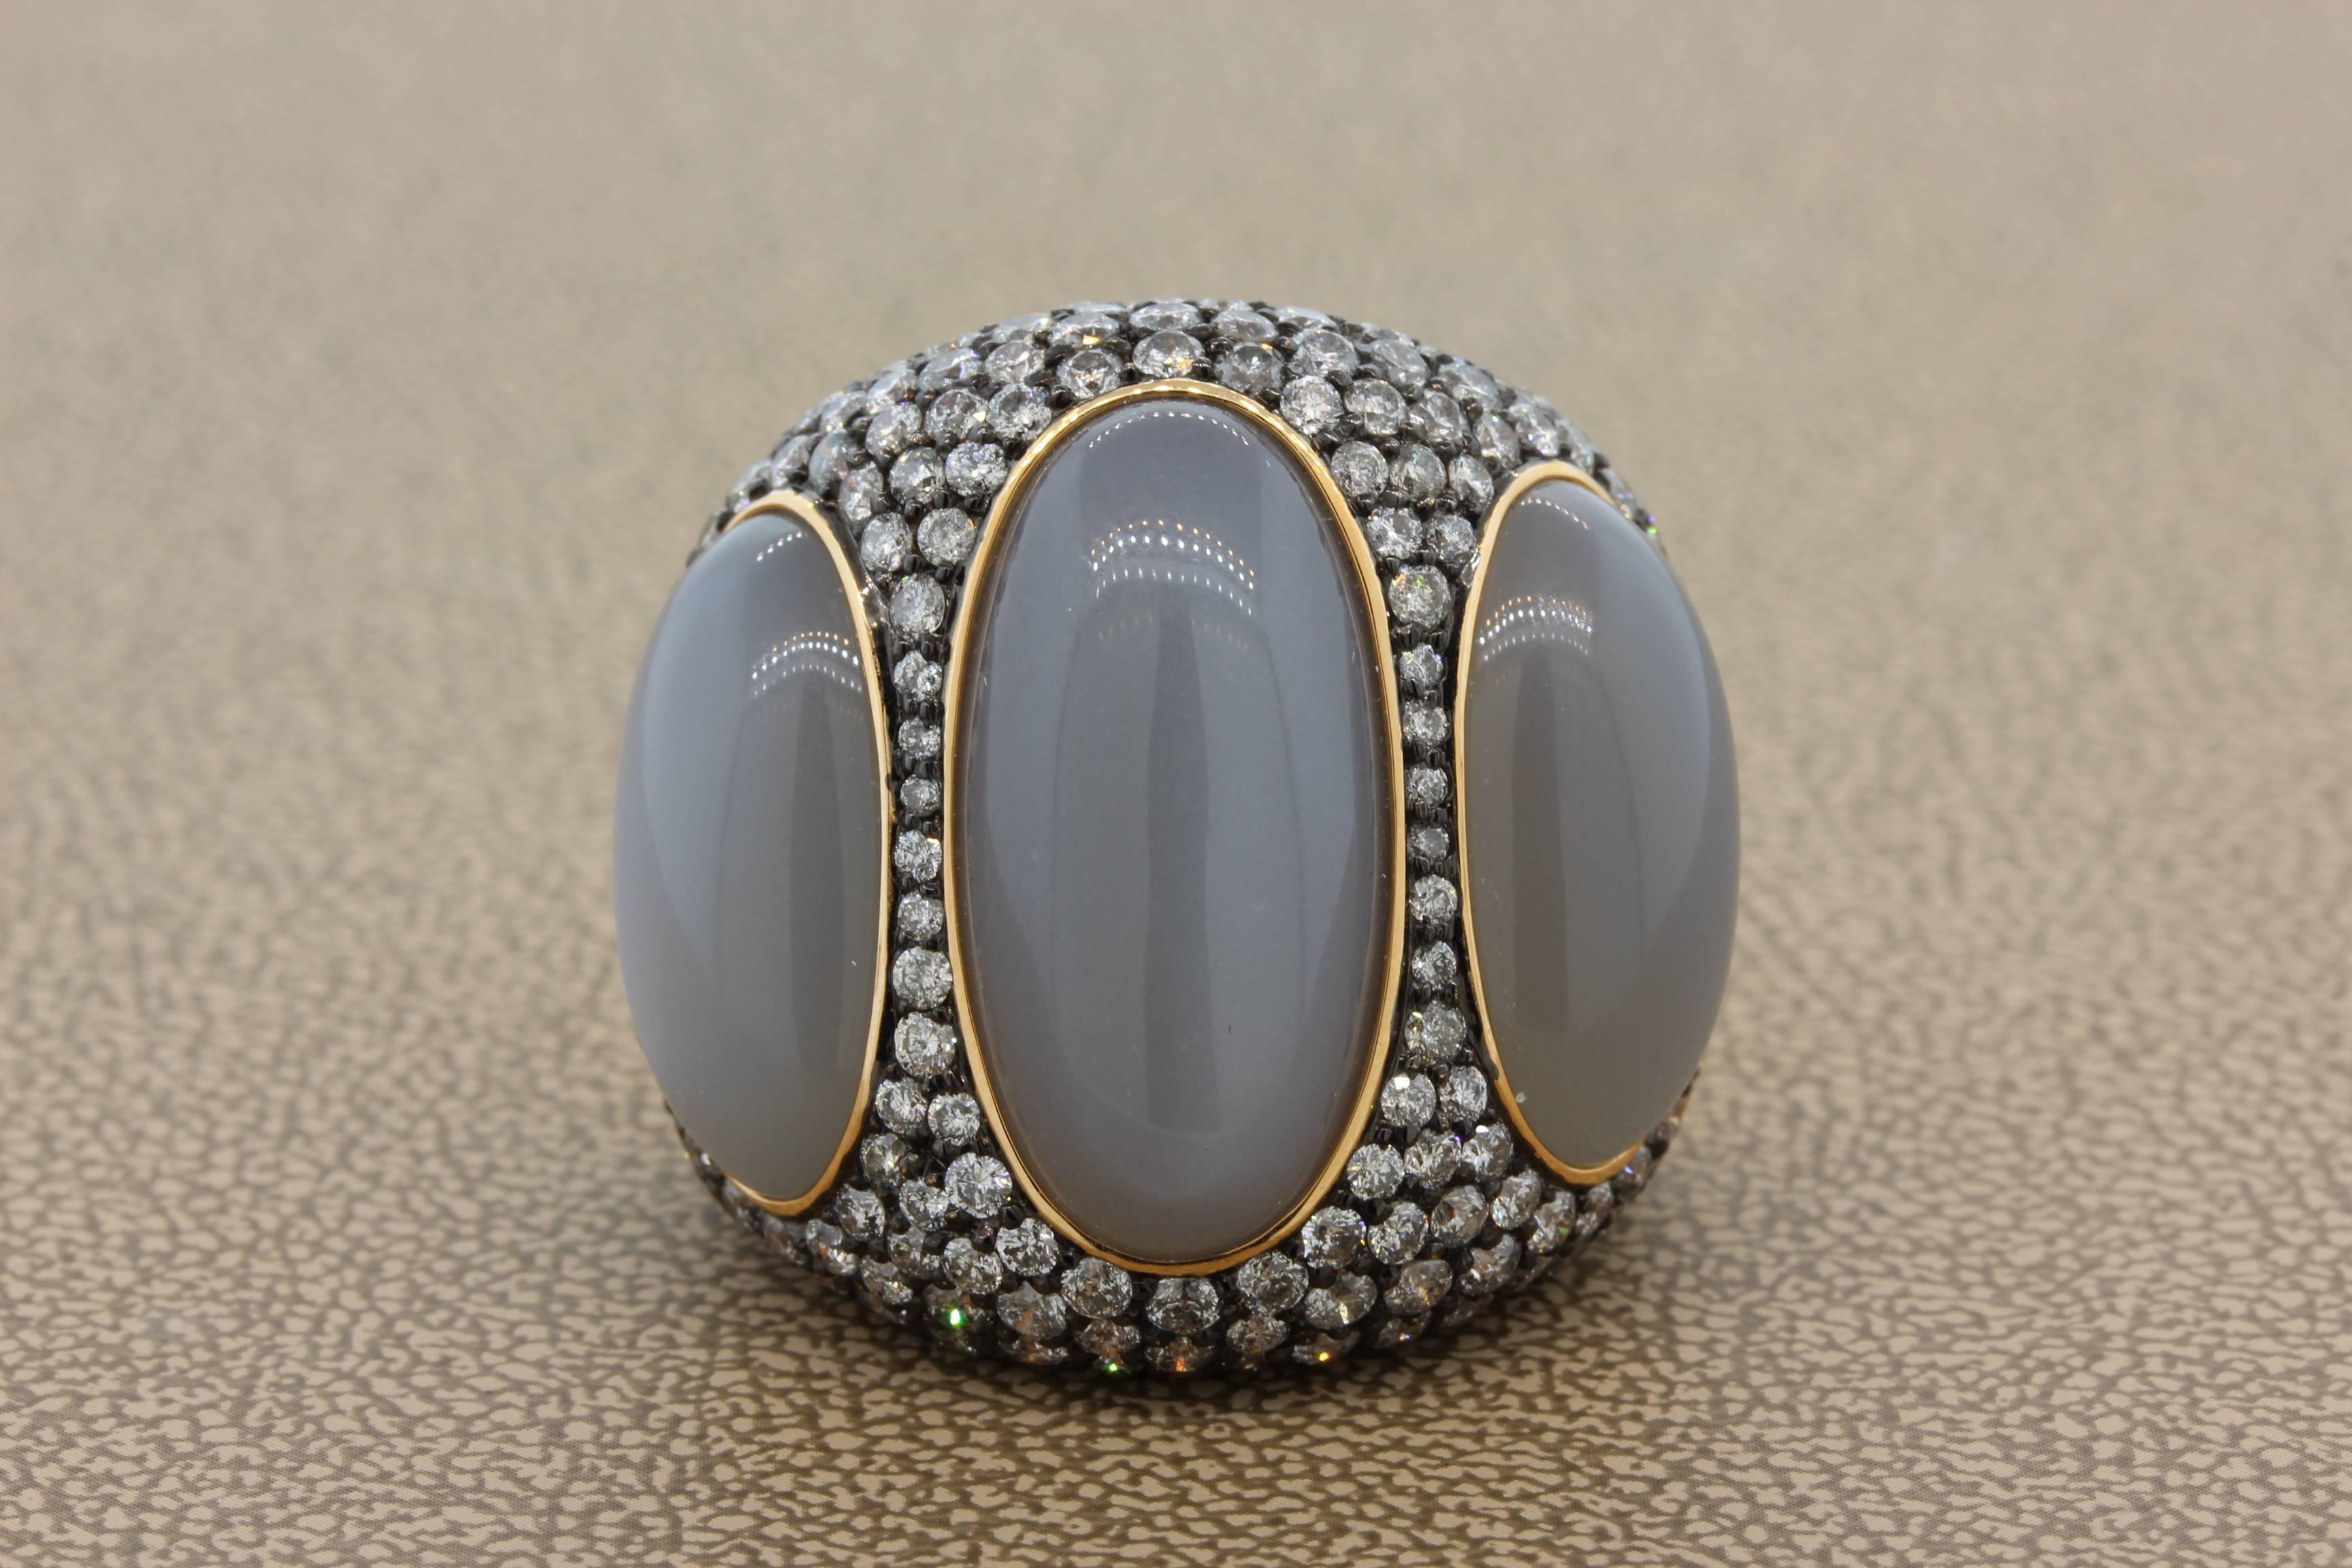 A lovely and unique cocktail ring fearing 3 pieces of luminous gray moonstone weighting 25.65 carats. The moonstone is accented by 5.39 carats of VS quality round cut diamonds which are set into 18K black rhodium gold. The rest of the ring is 18K